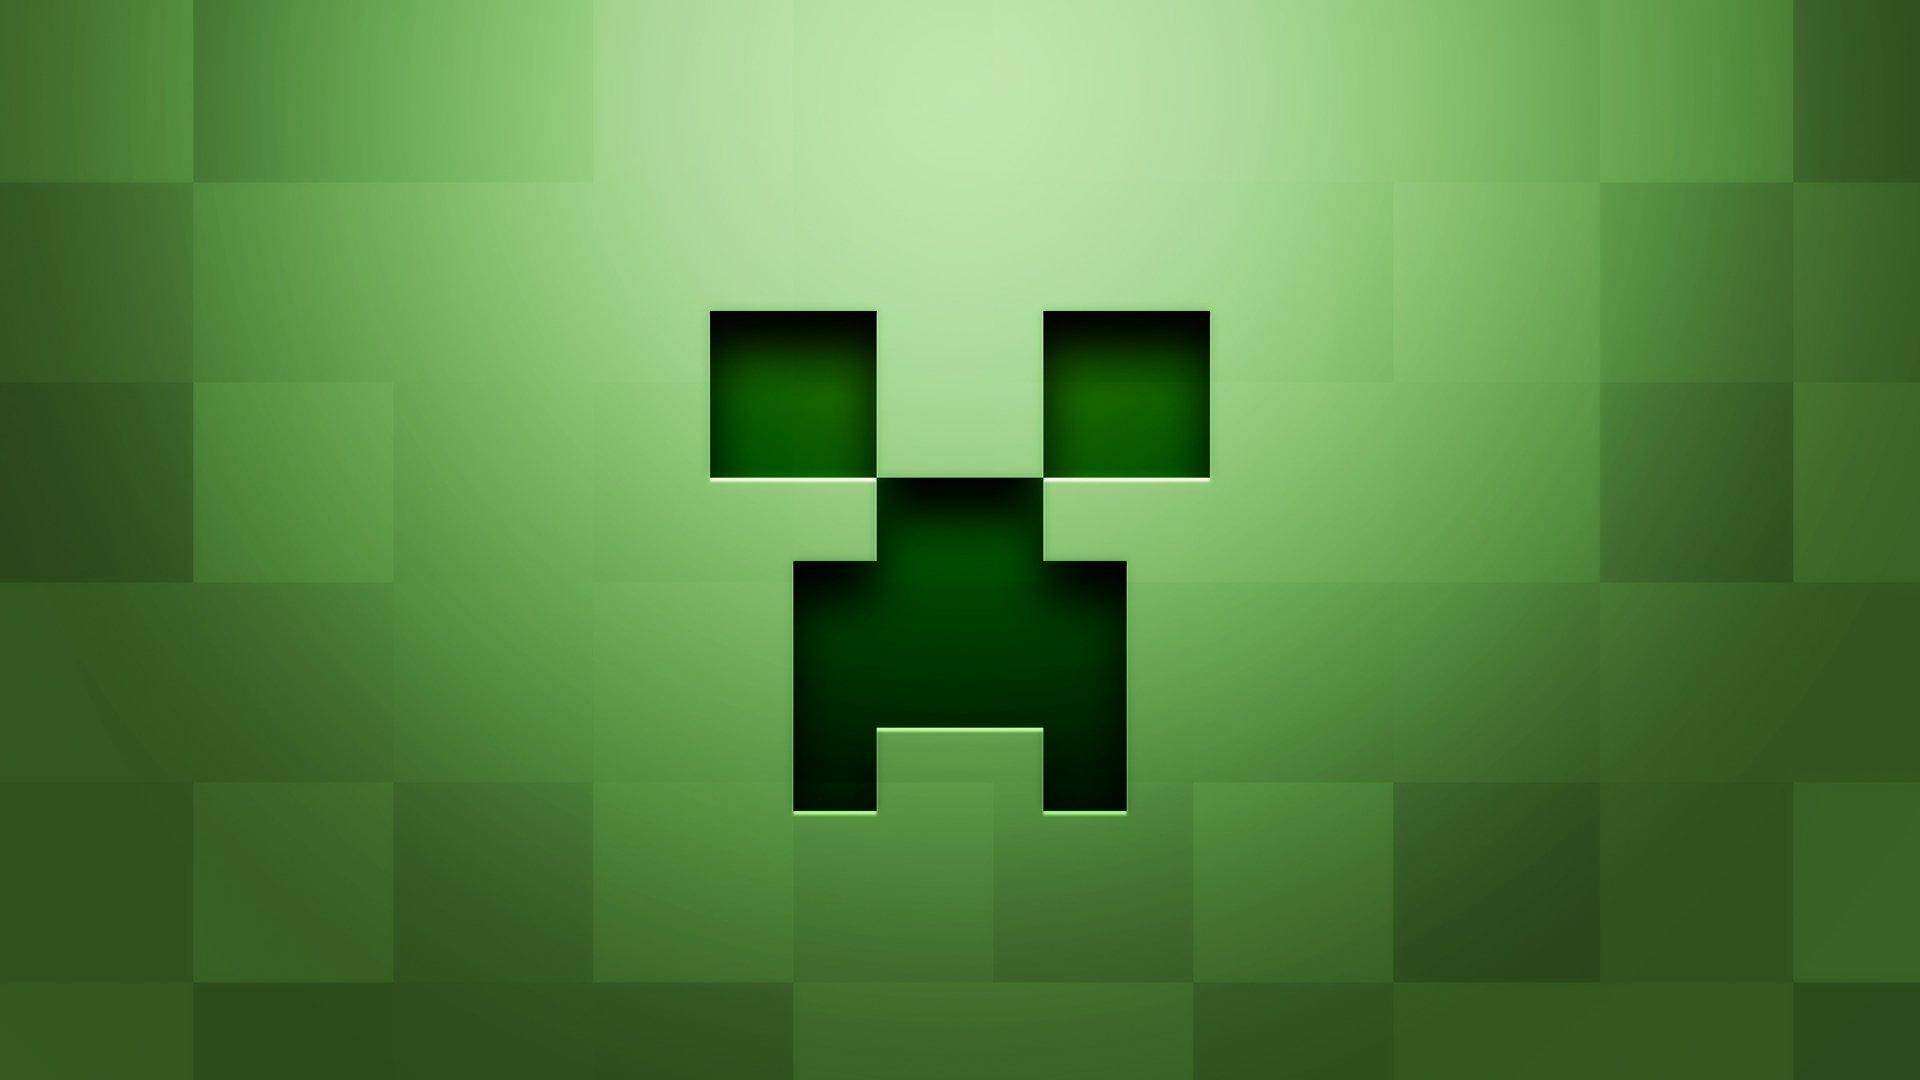 Creeper (Minecraft) HD Wallpaper and Background Image